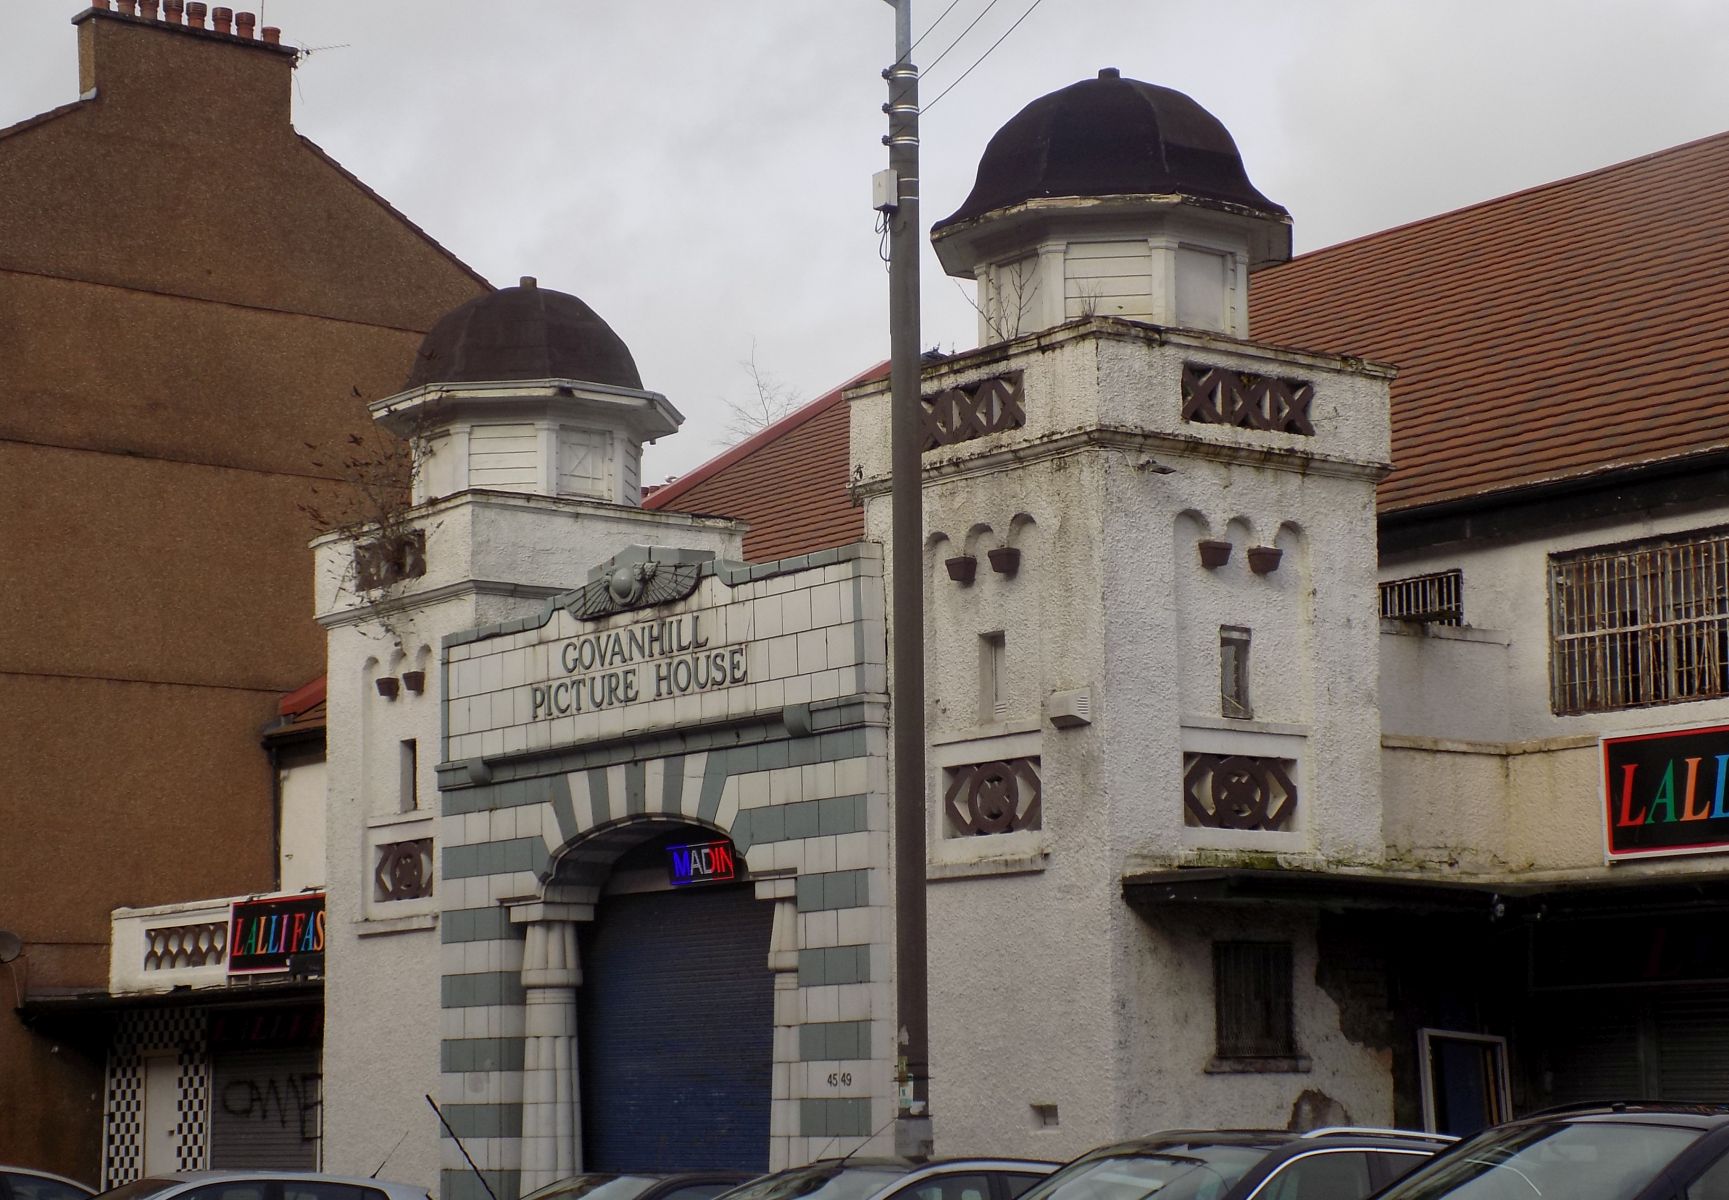 Govanhill Picture House